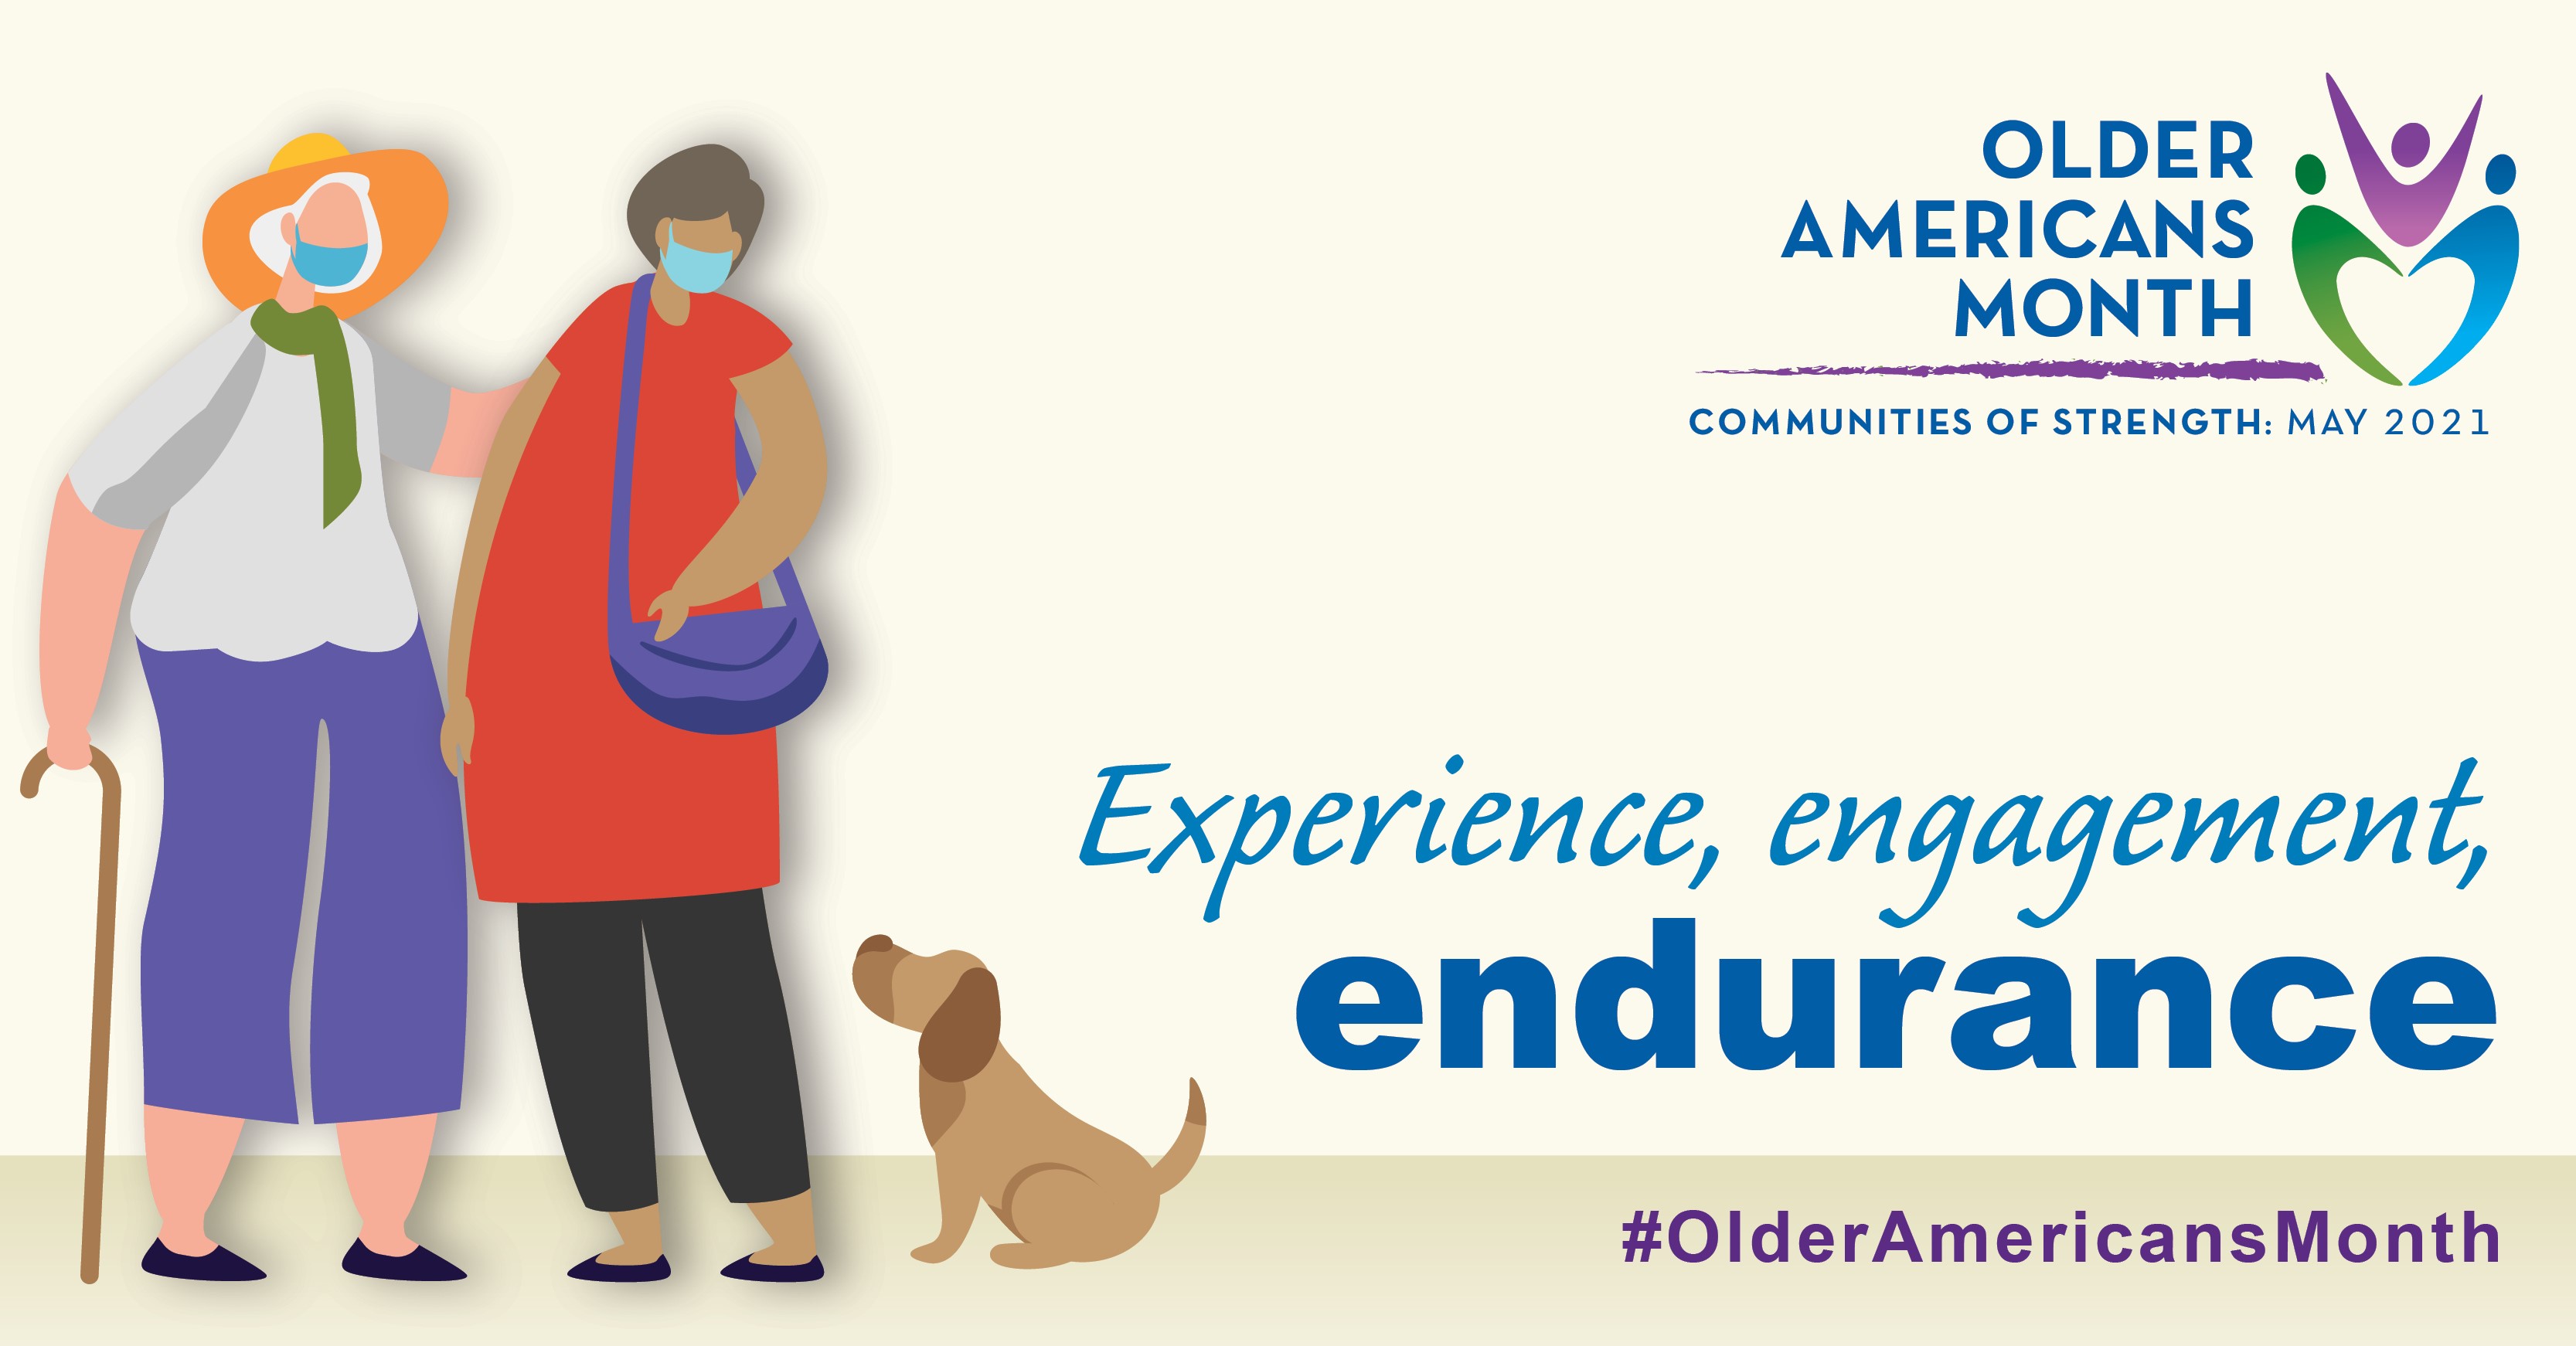 Social Media Graphic: Communities of Strength, Older Americans Month, May 2021. Experience, engagement, endurance. #OlderAmericansMonth